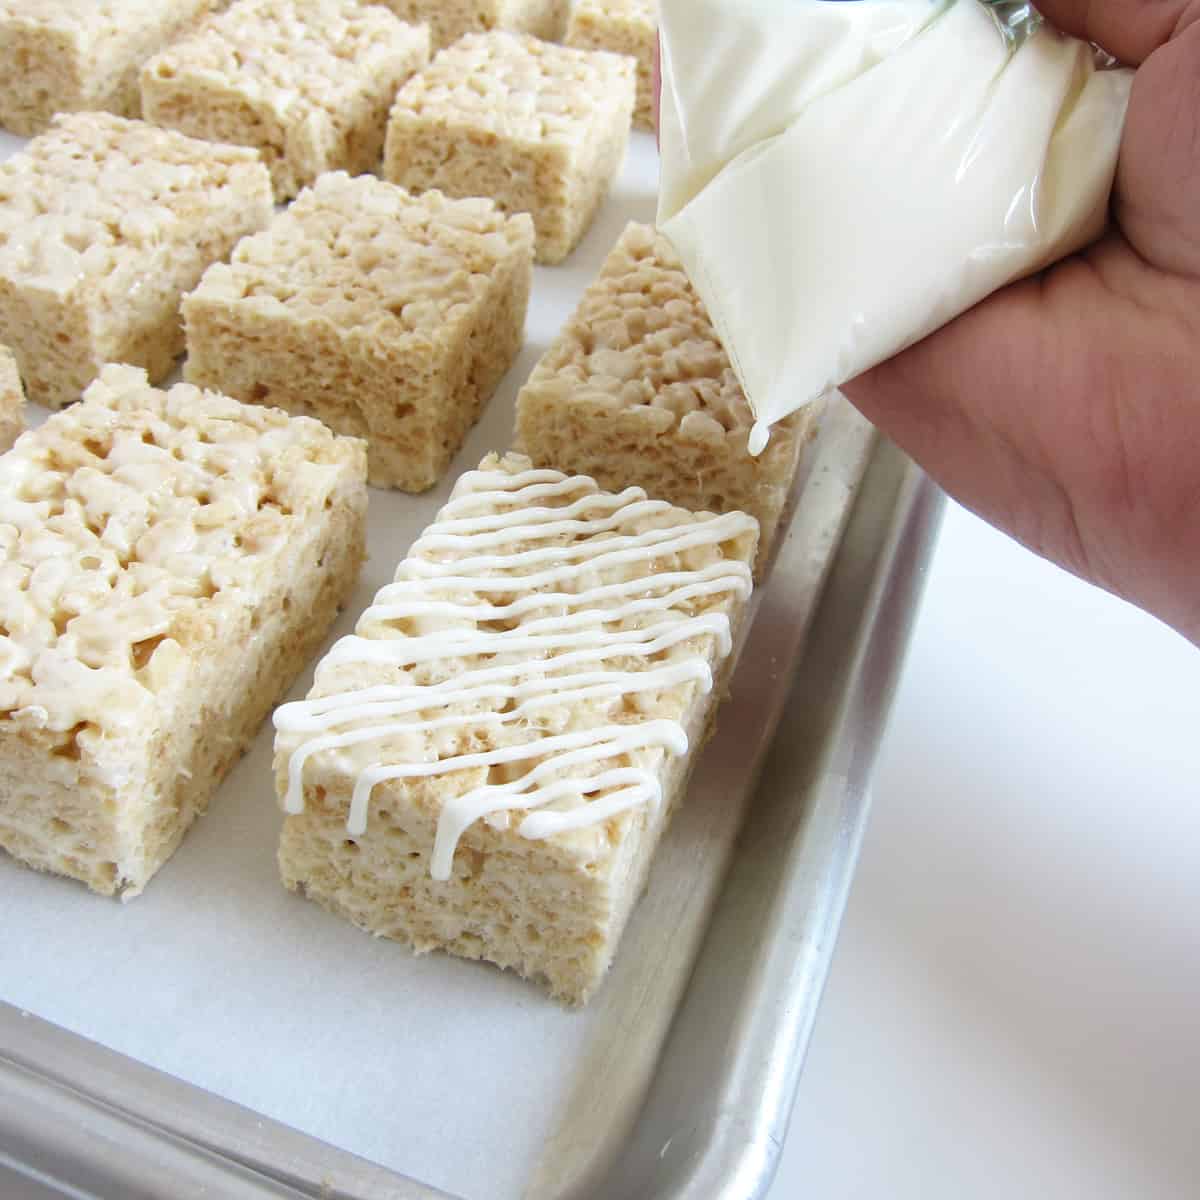 Drizzling white chocolate over a Rice Krispie Treats using a small zip-top bag.